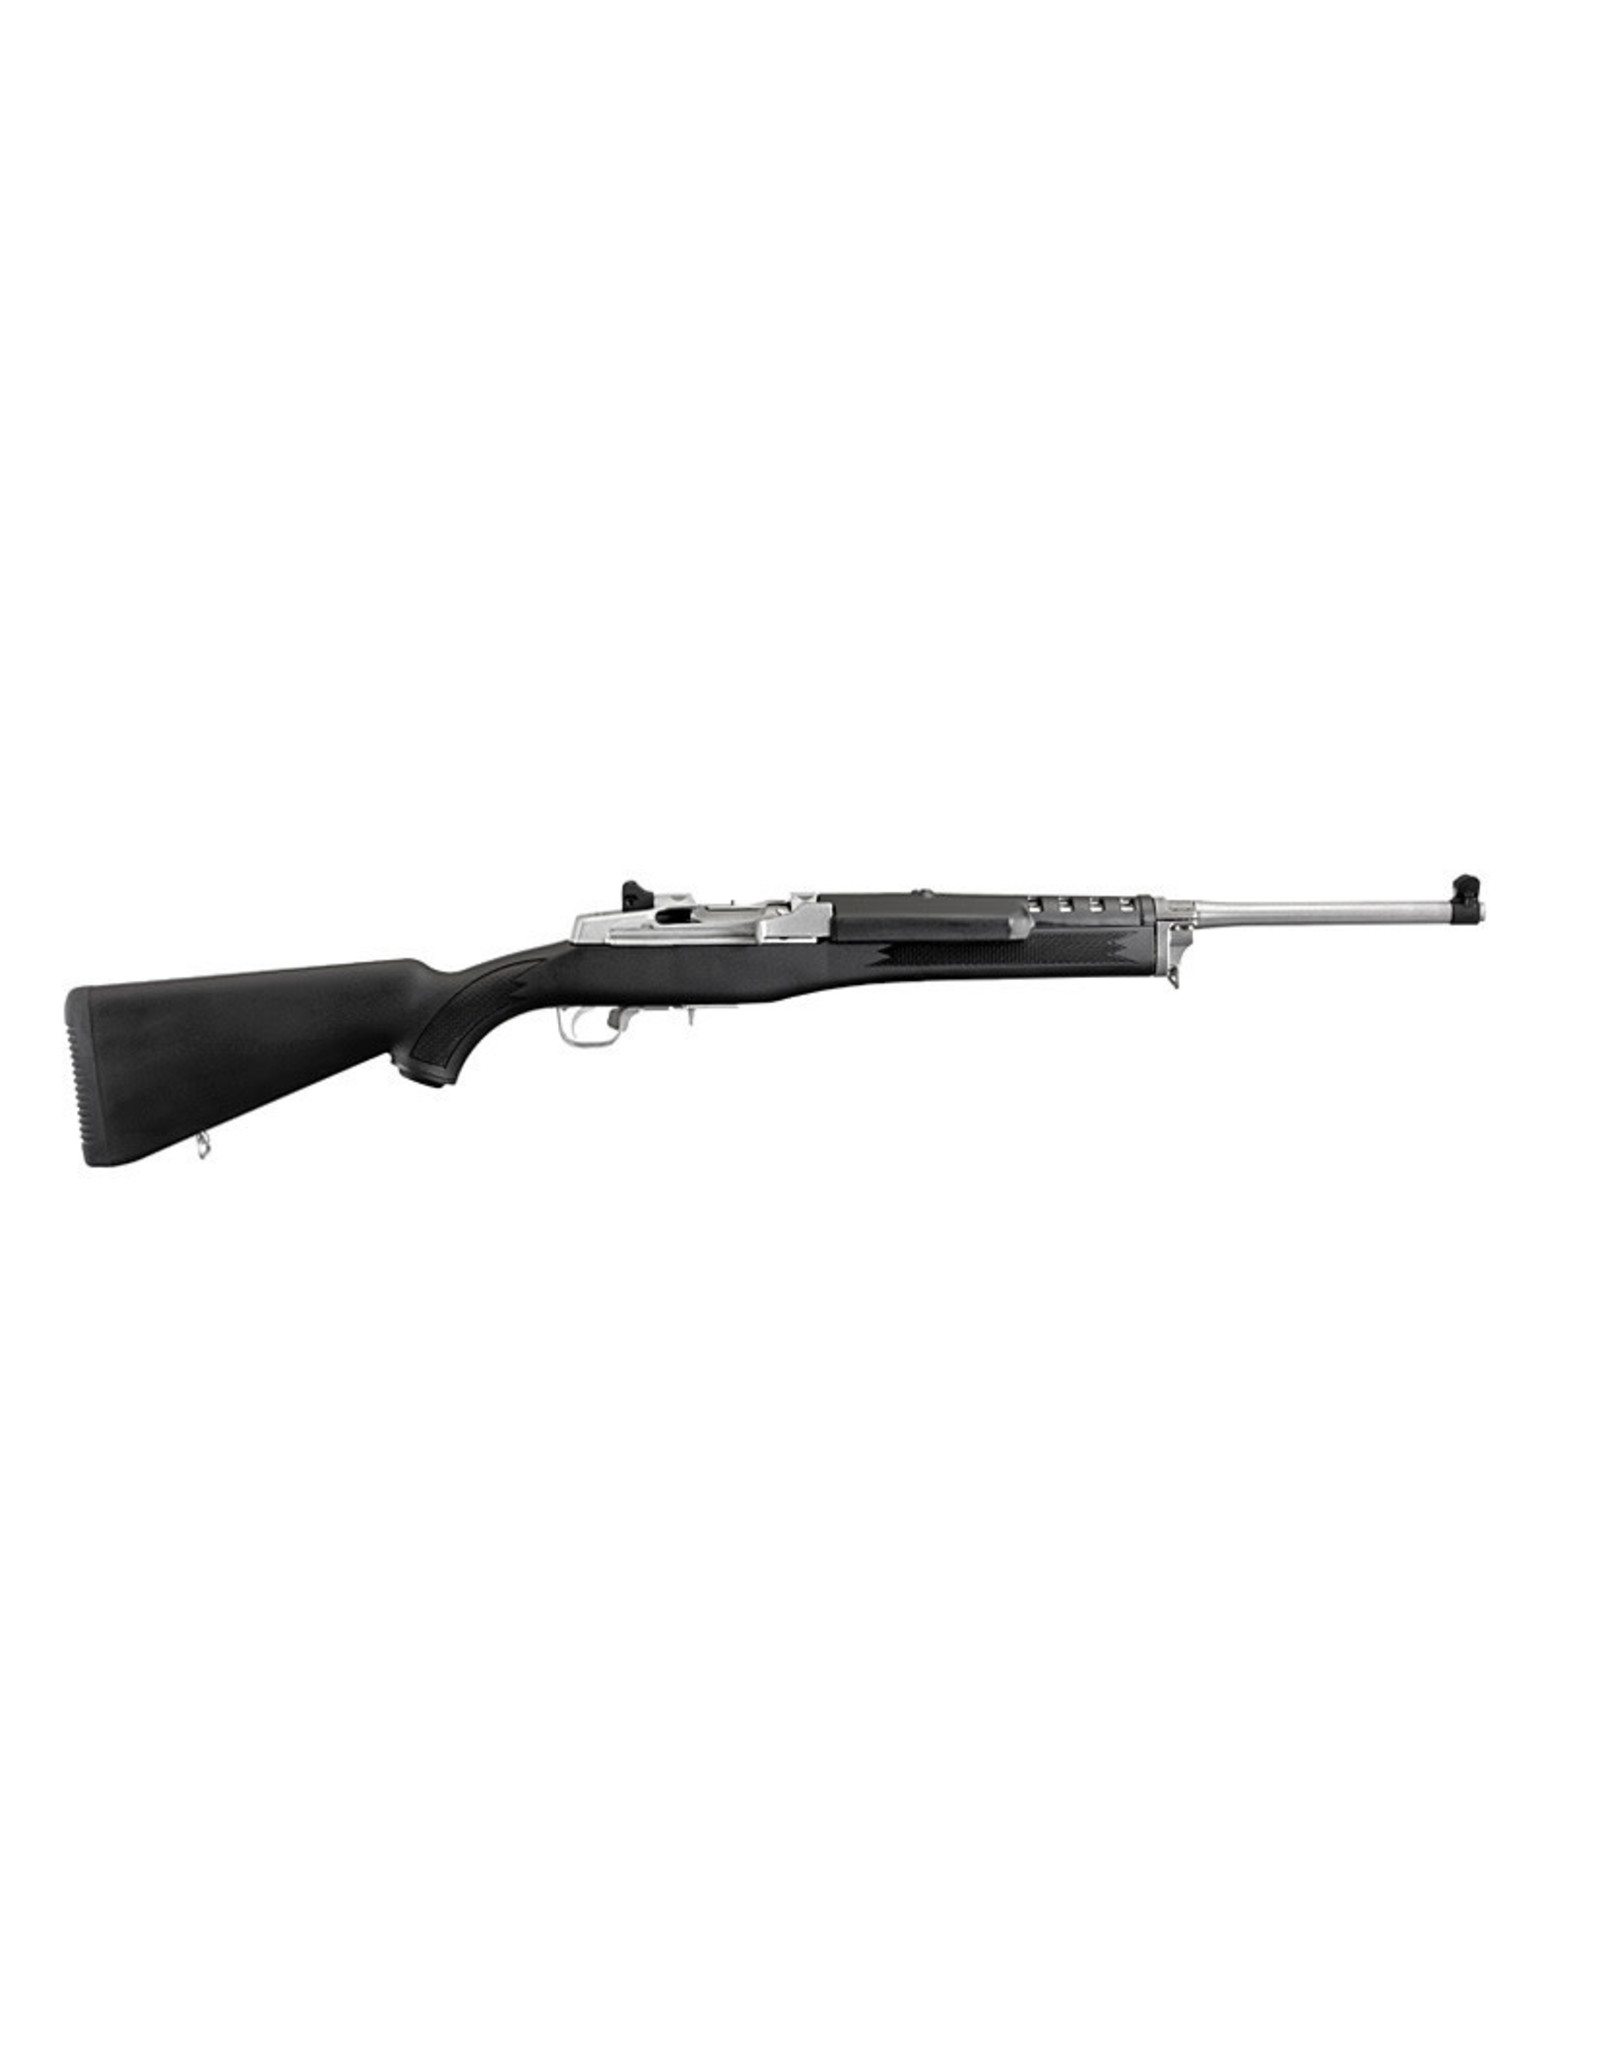 RUGER Ruger Mini-14 Ranch Semi Automatic Rifle 5.56 NATO